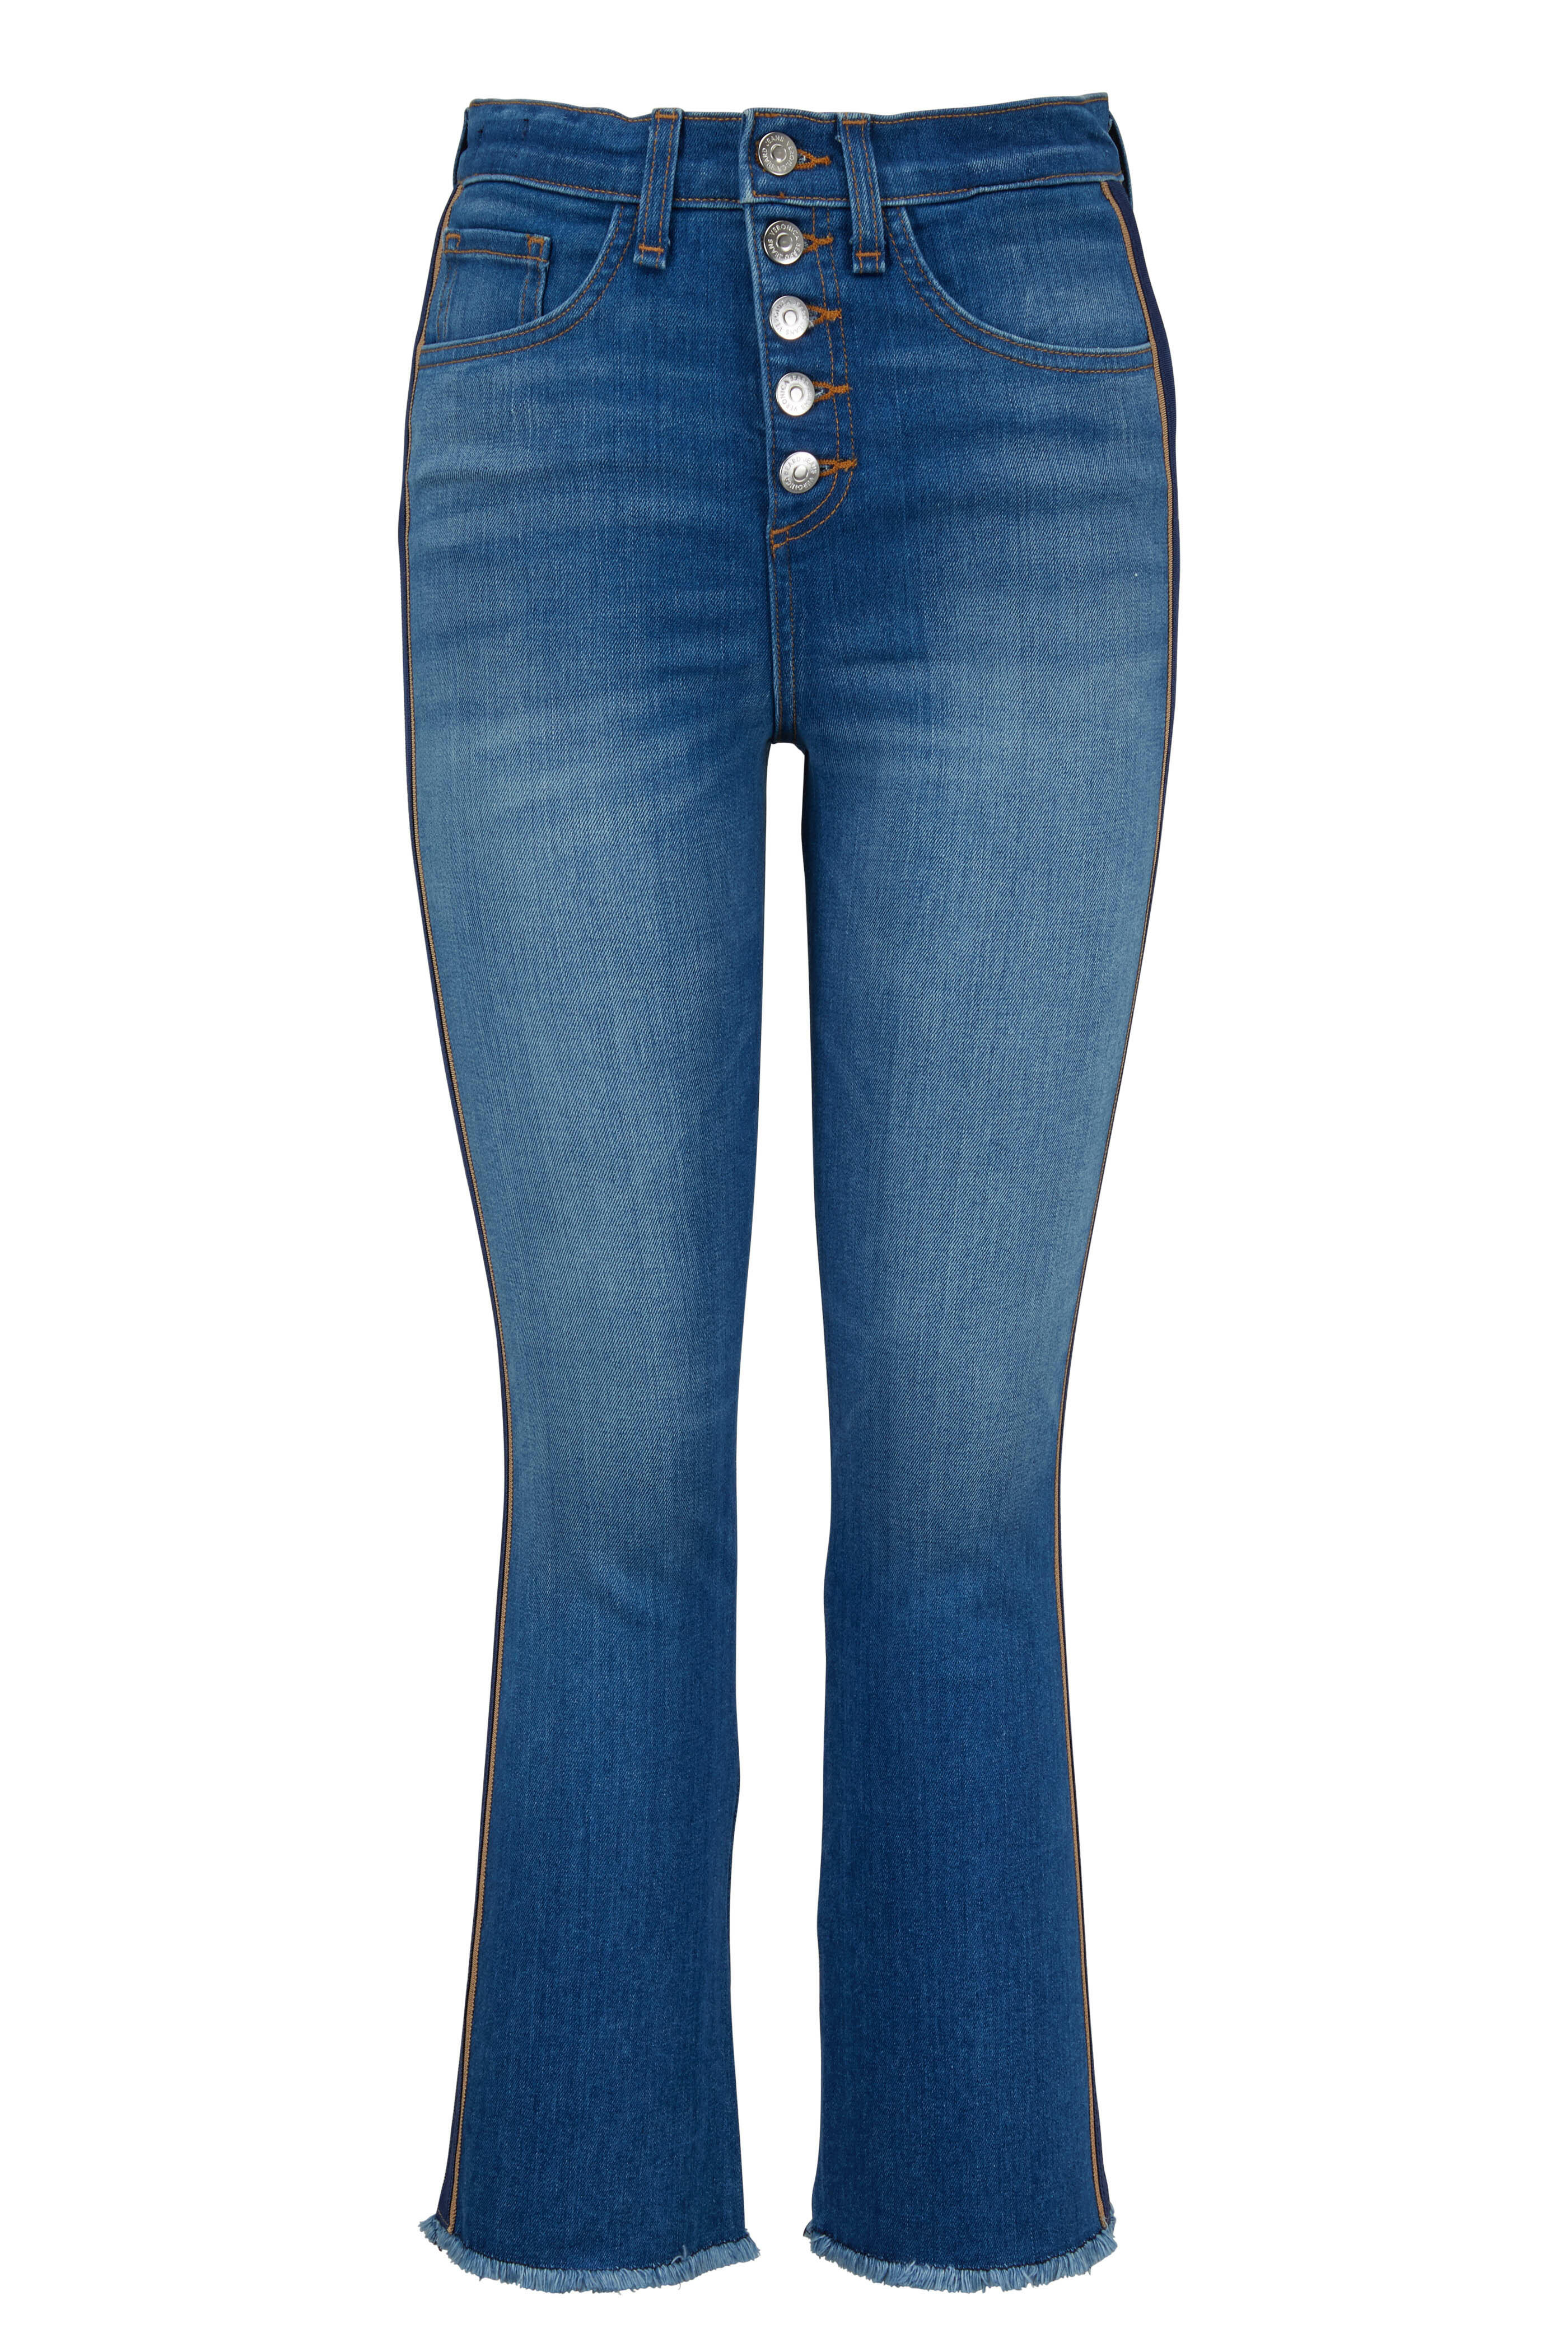 R29 Editors Review Bebe Flared Jeans - Deal